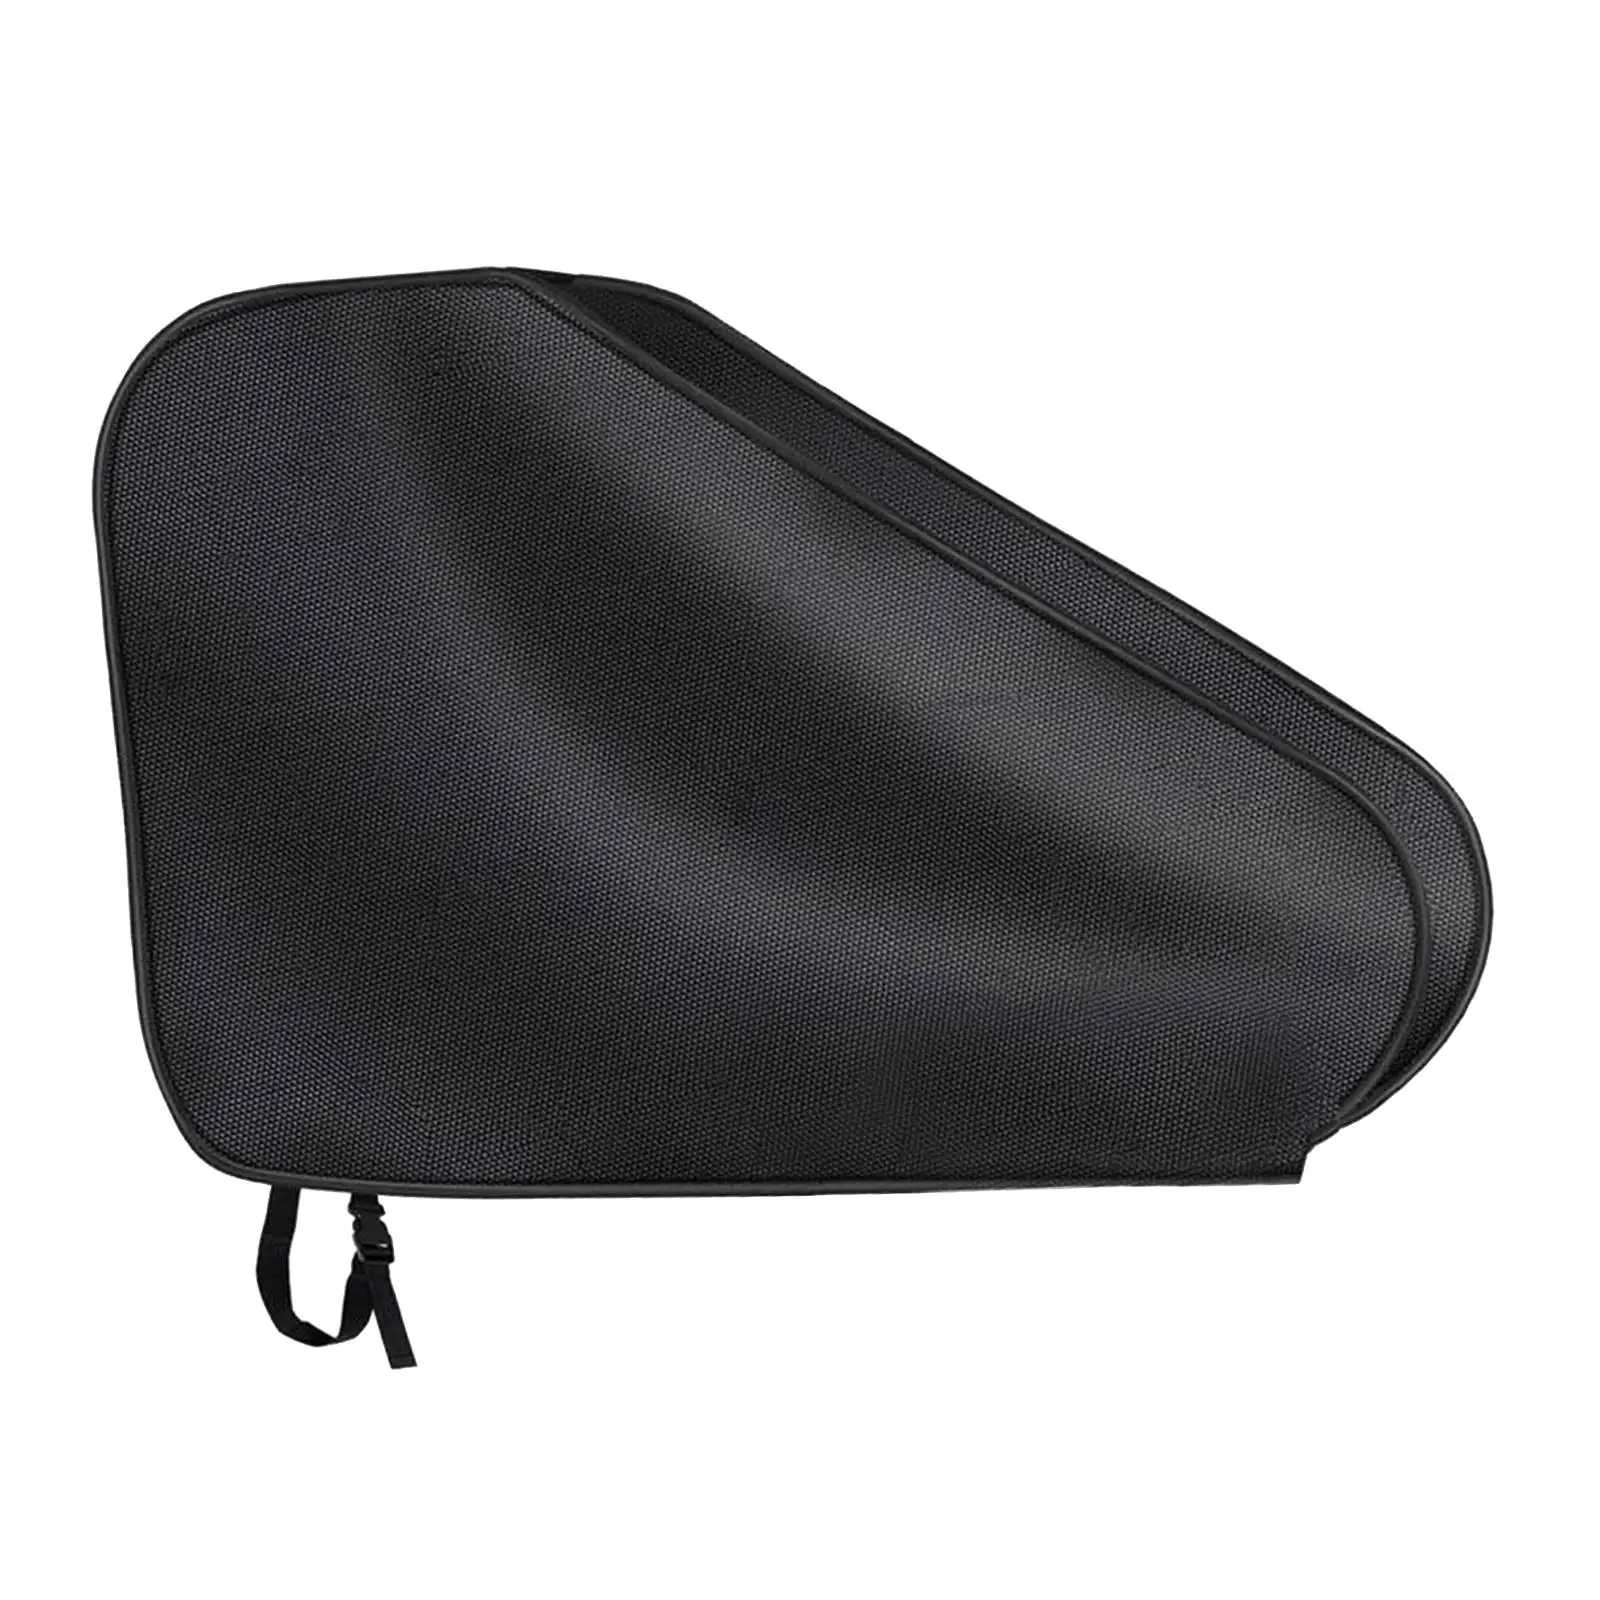 Caravan Hitch Cover 600D Oxford Cloth Trailer Tow Ball Coupling Lock Cover